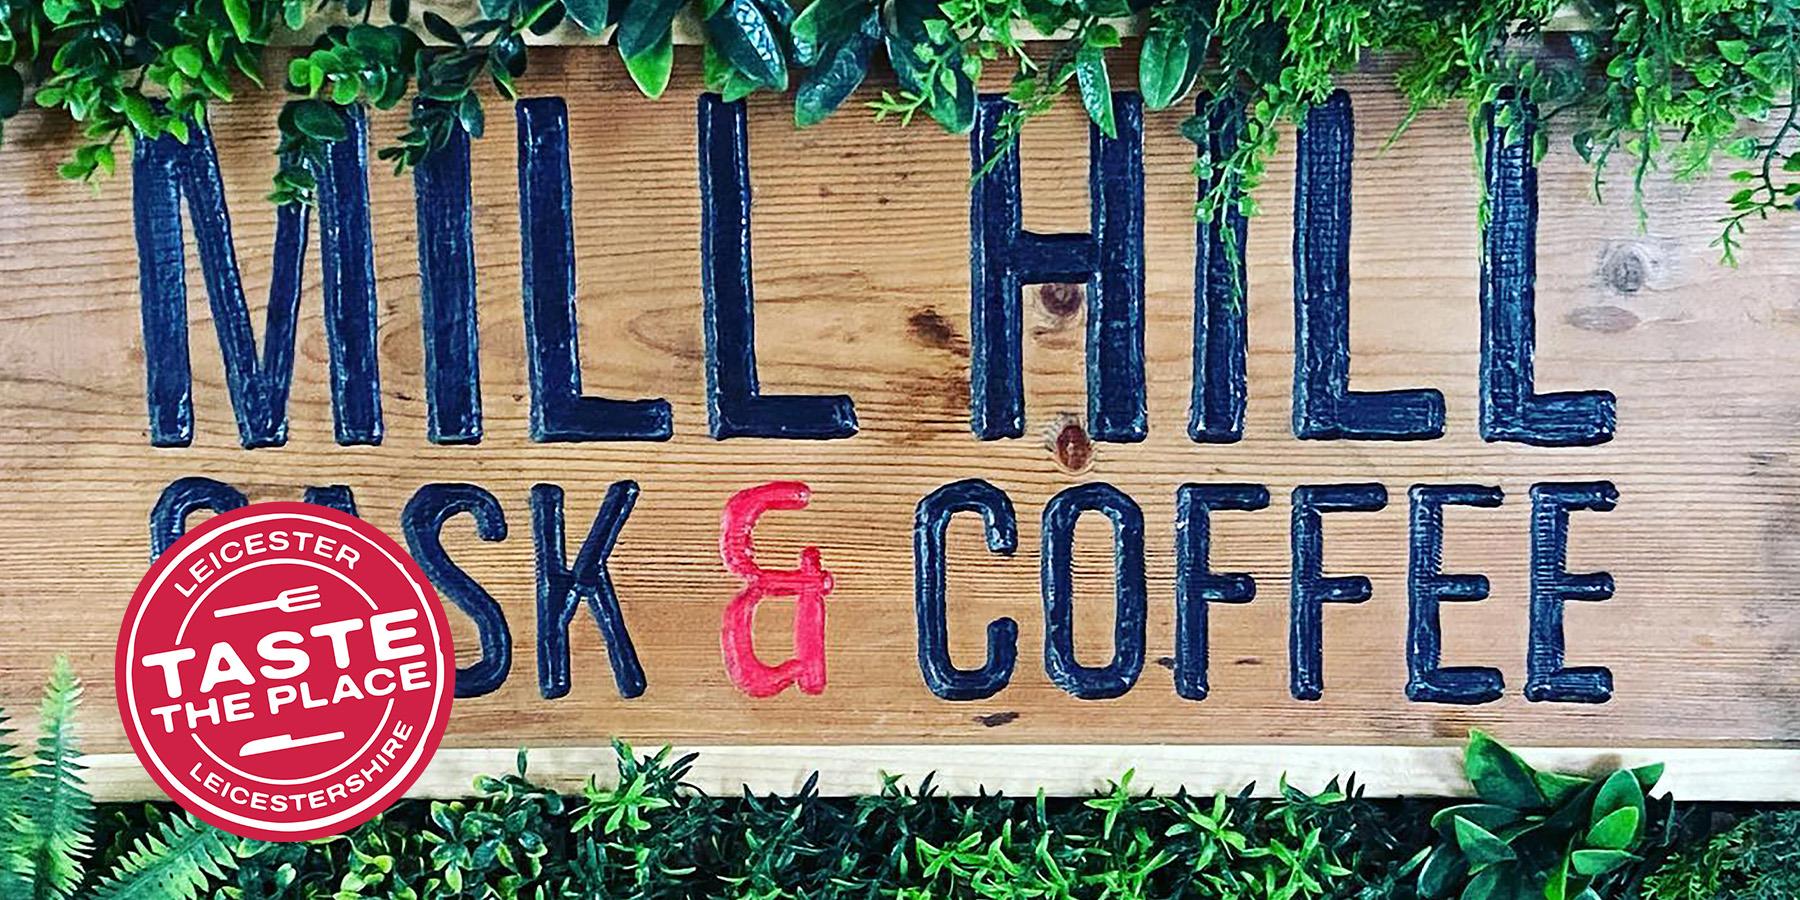 mill hill cask and coffee sign